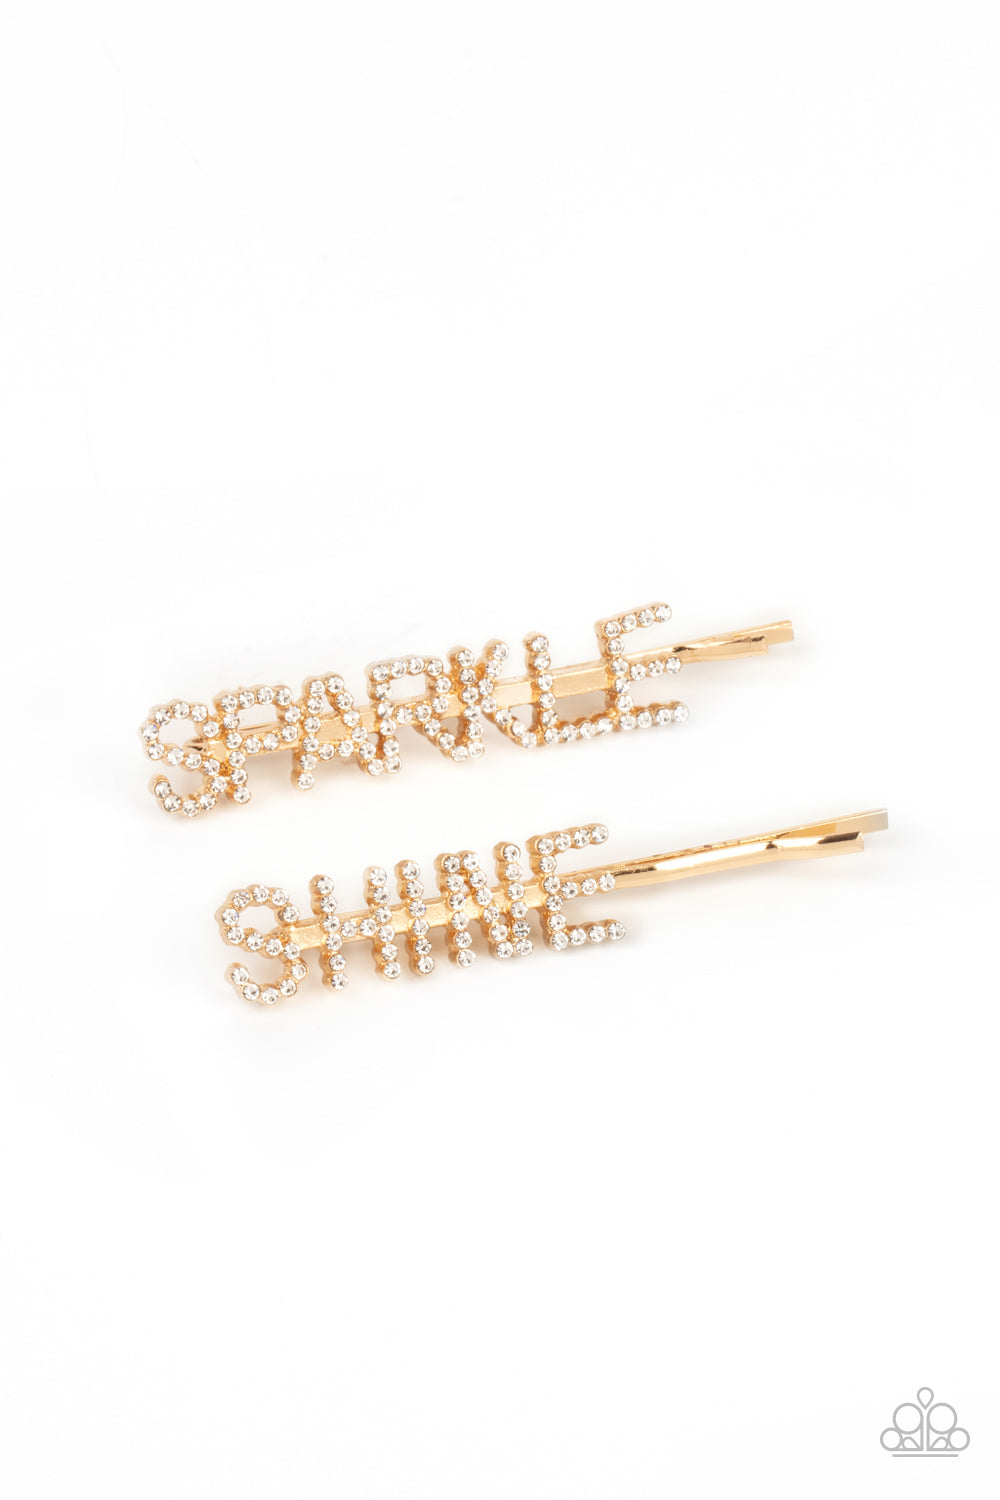 Center of the SPARKLE-verse - Gold Hairclip - Paparazzi - Dare2bdazzlin N Jewelry